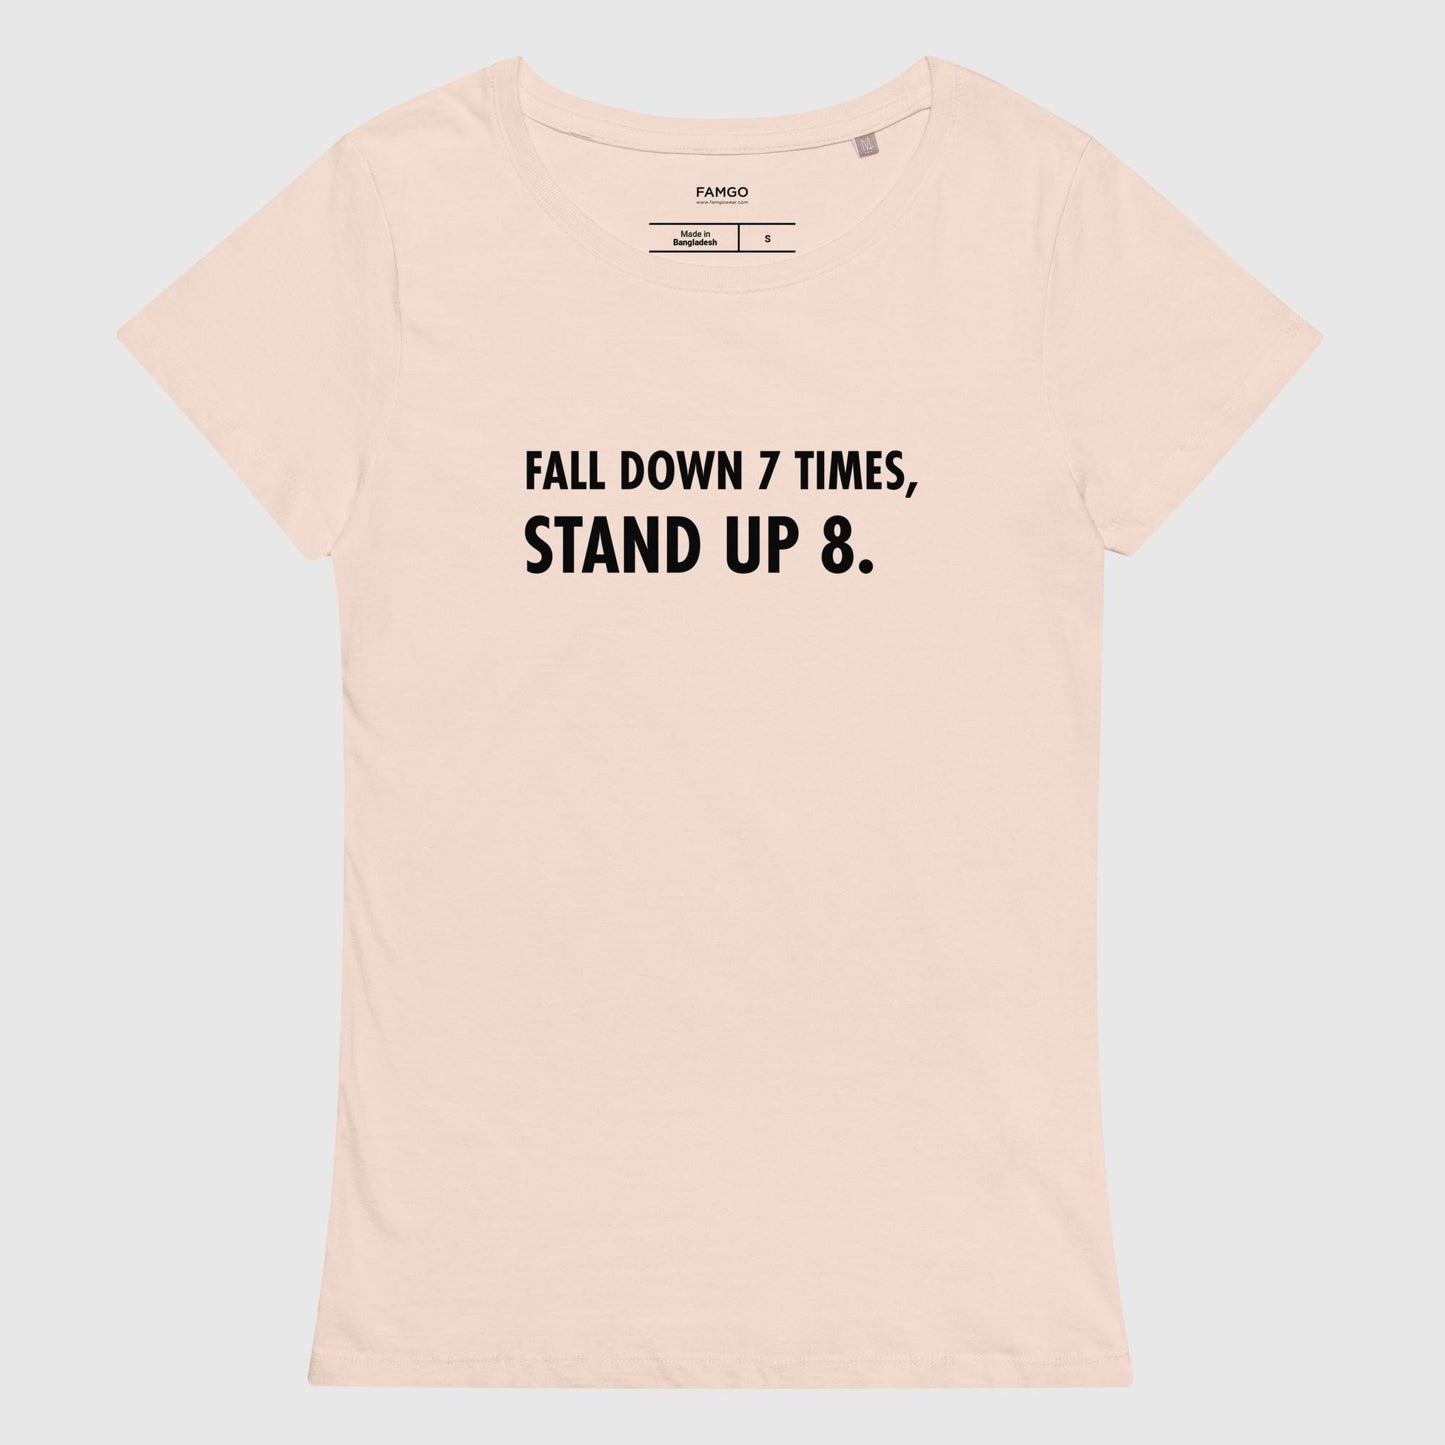 Women's creamy pink organic cotton t-shirt that features the Japanese proverb, "Fall Down 7 Times, Stand Up 8."